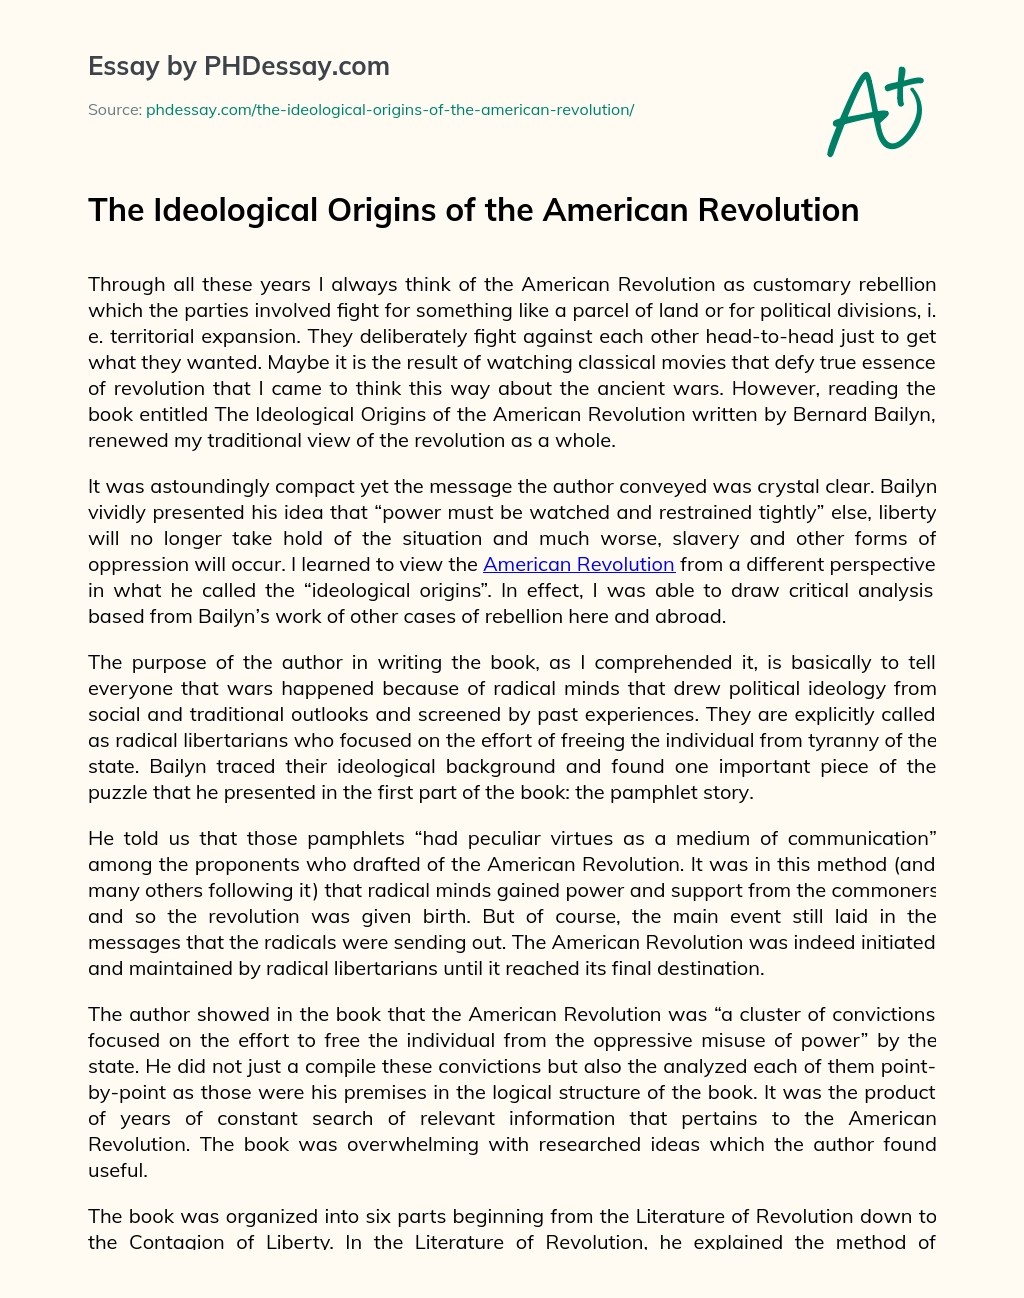 The Ideological Origins of the American Revolution essay